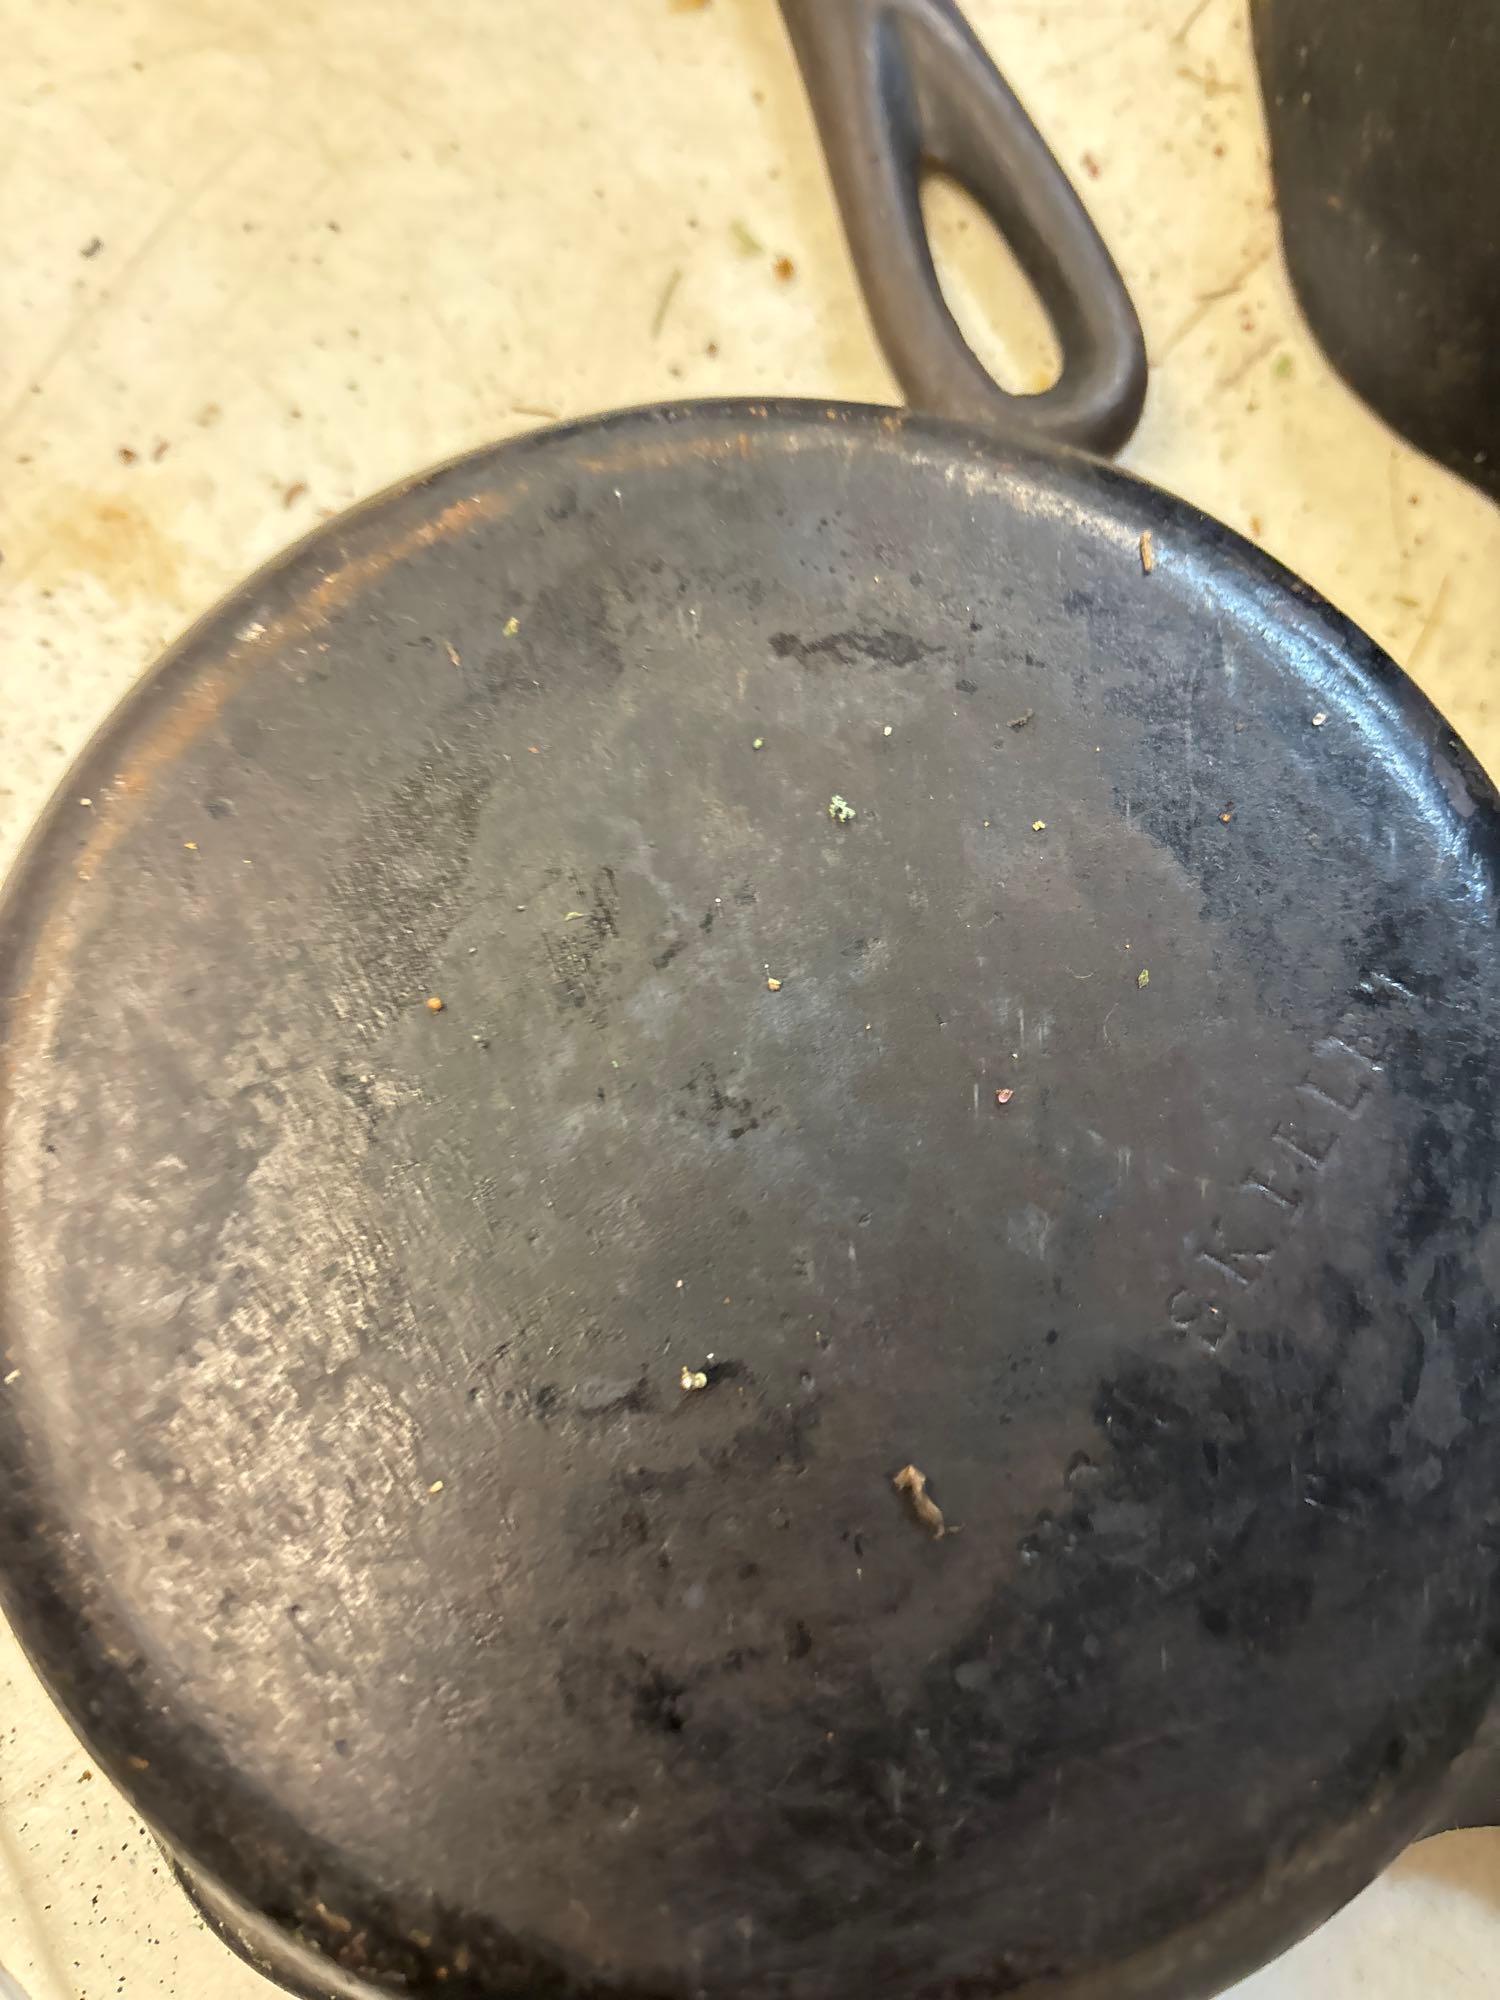 large lot of cast-iron pans Wagner Ware etc.